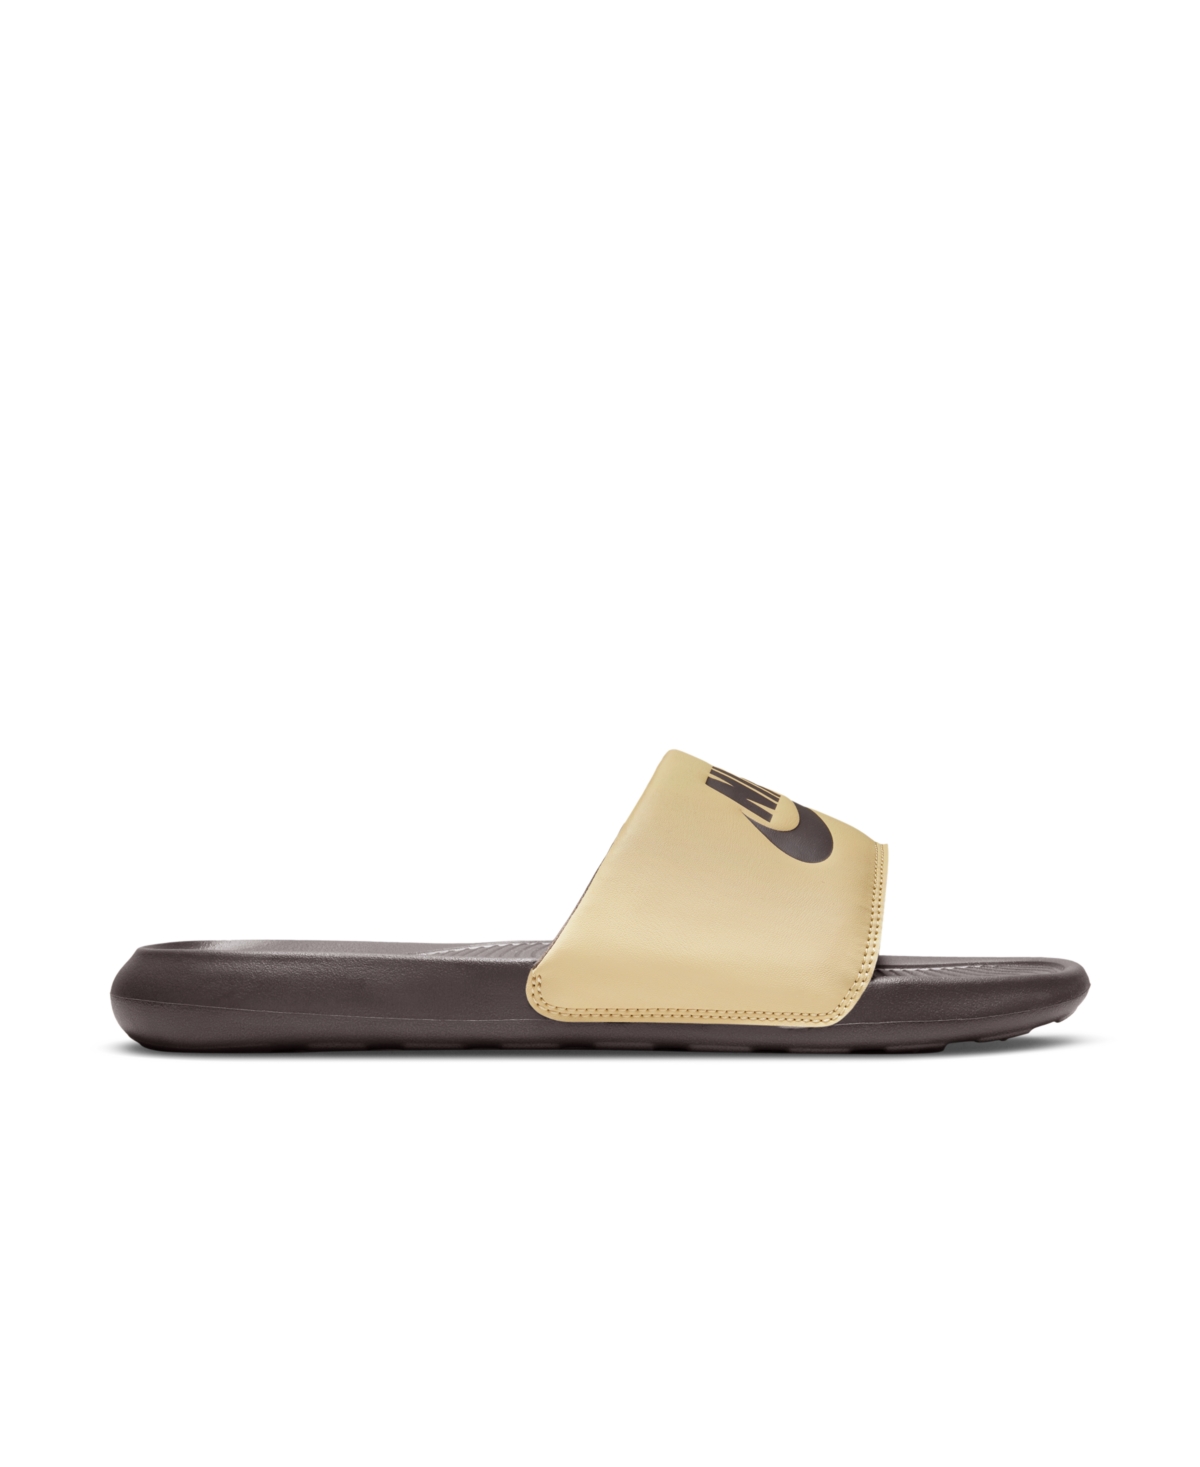 Nike Men's Victori One Slide Sandals from Finish Line | Shop Your Way ...